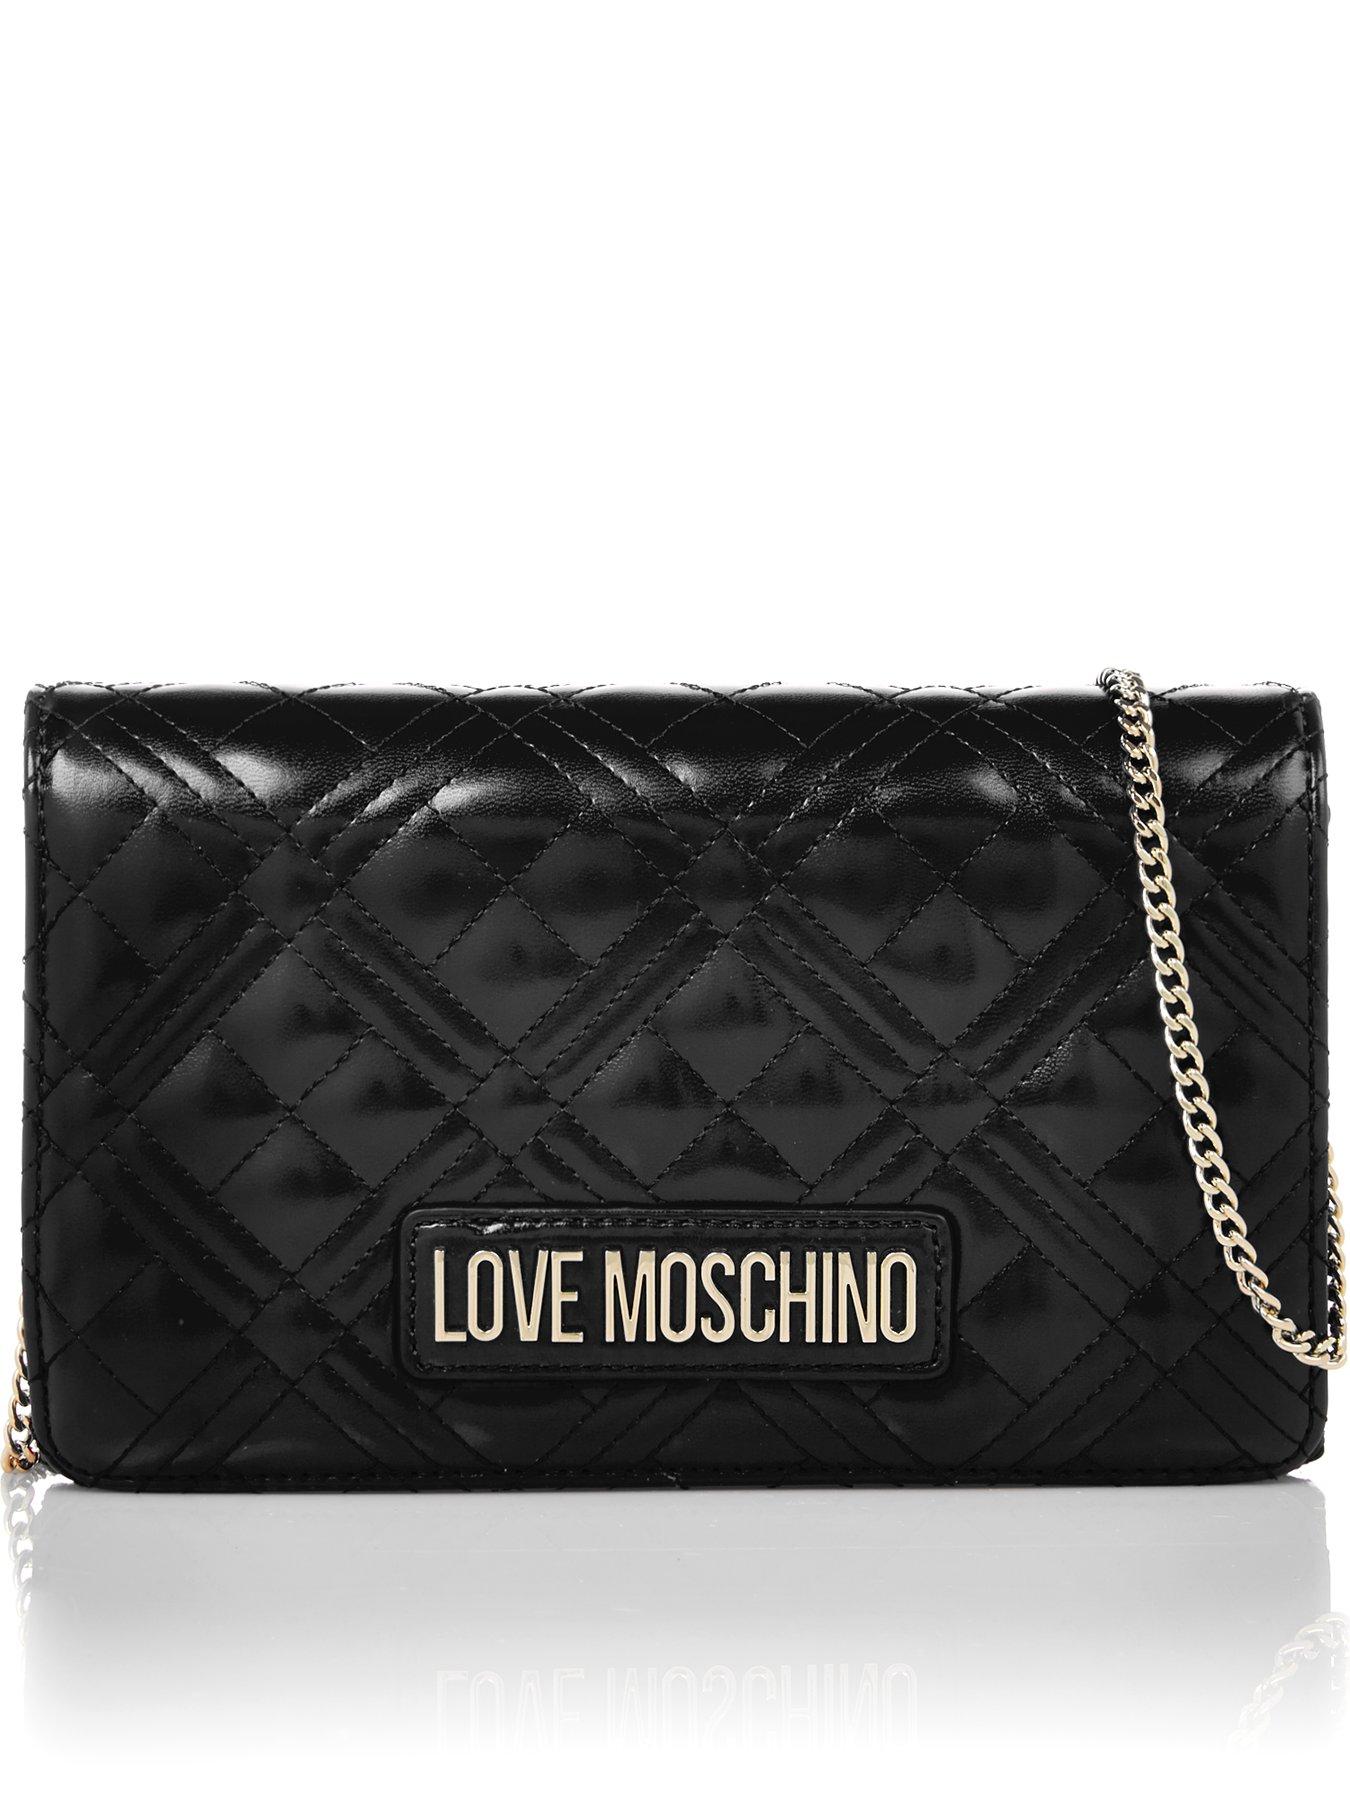 LOVE MOSCHINO Quilted Logo Cross-body 